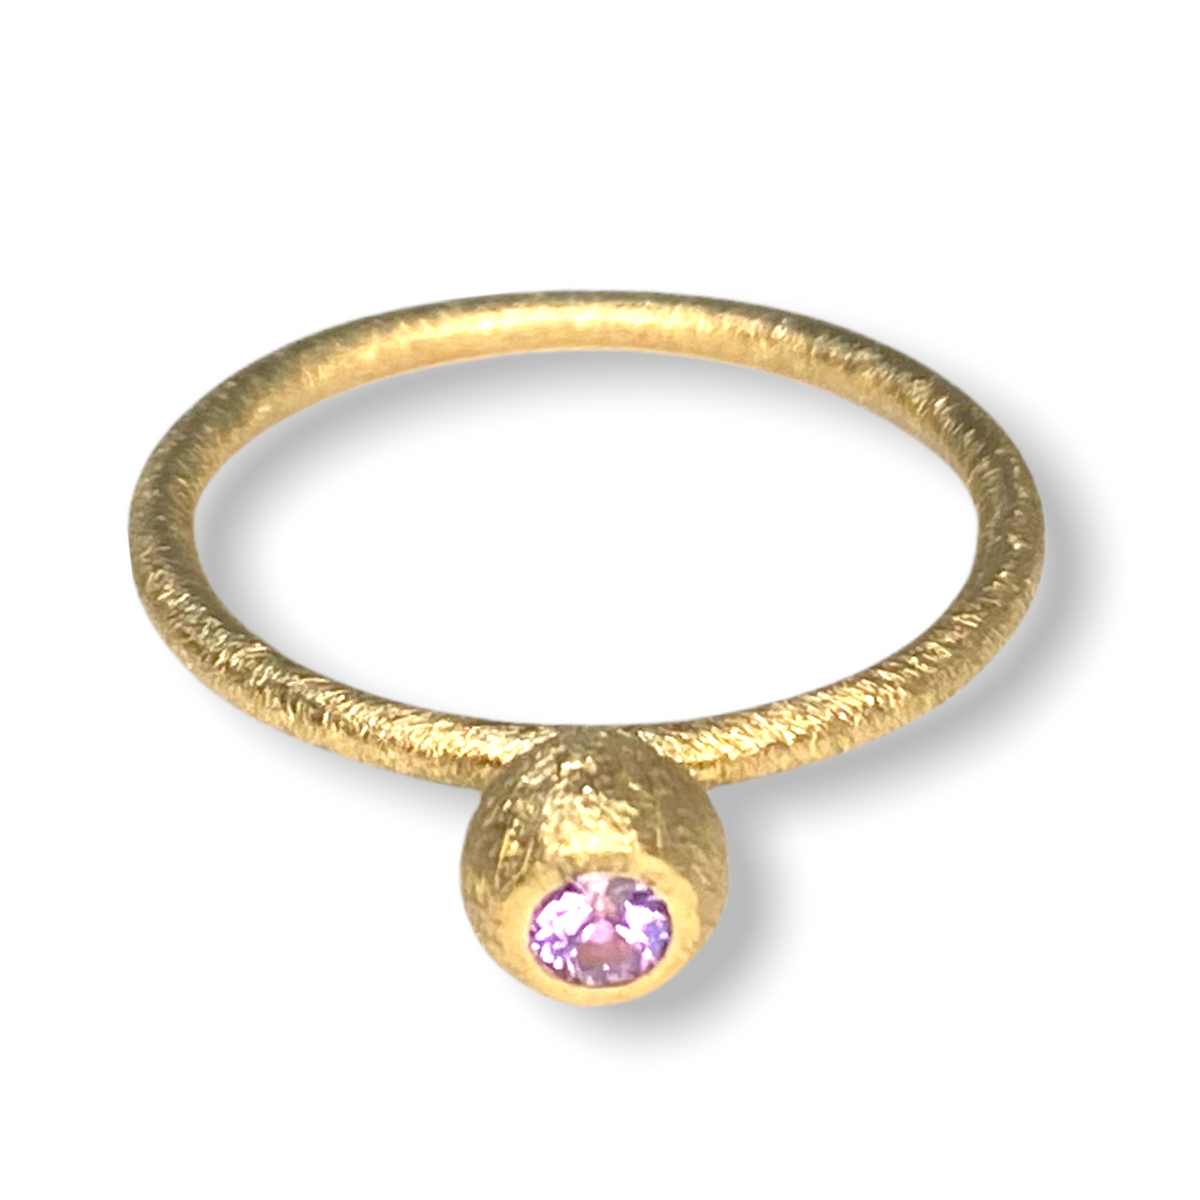 Sarah Little Ball Shaped Stacker | Gold Stacking Ring | Choose Your Metal And Gemstone